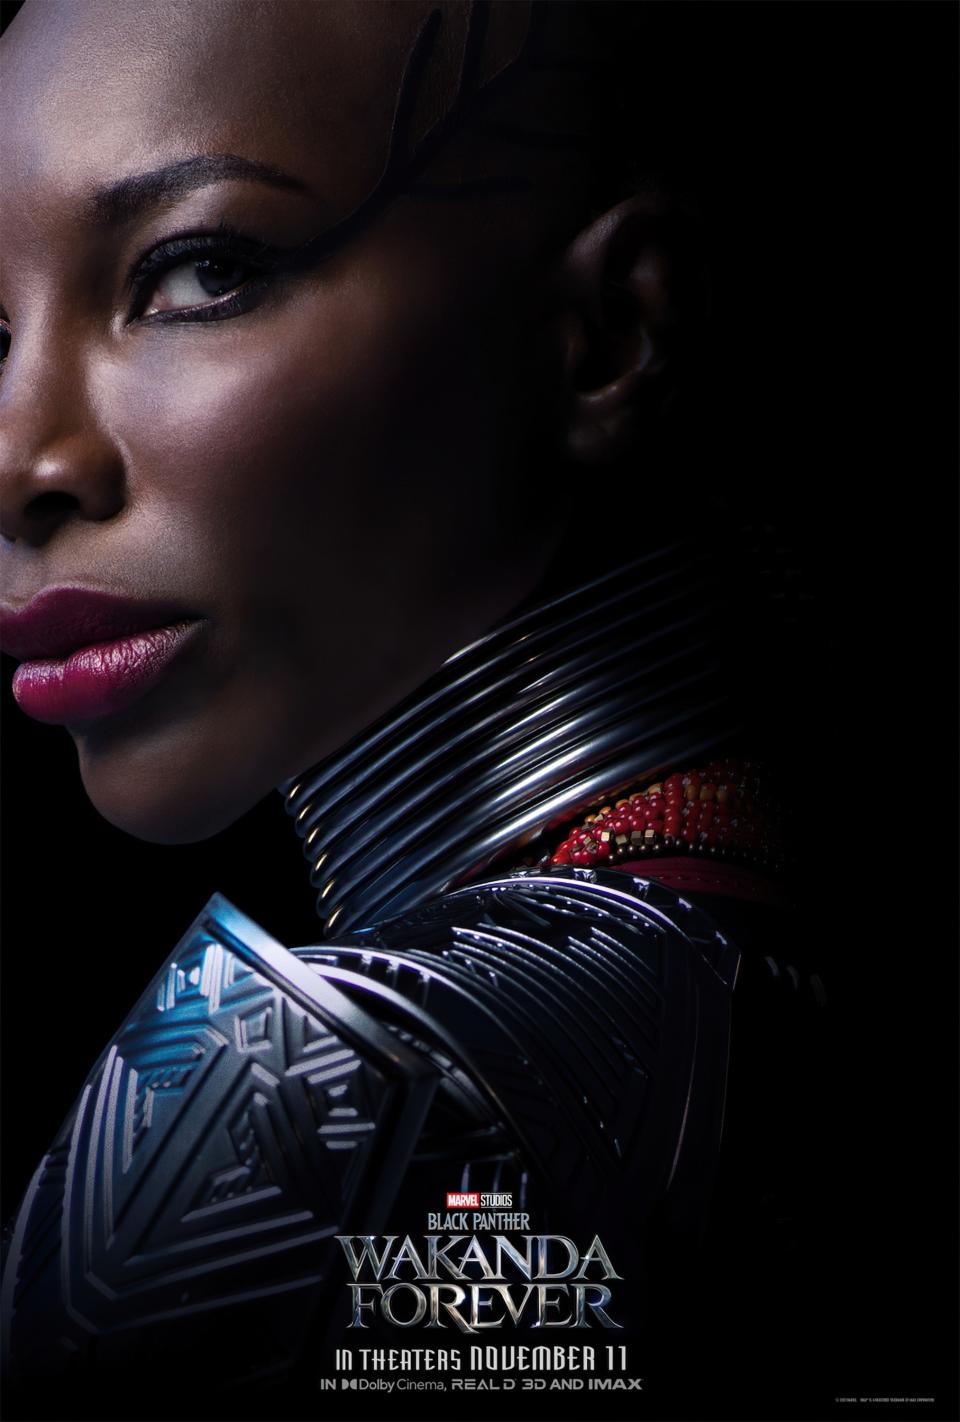 Close-up of Aneka in the movie poster